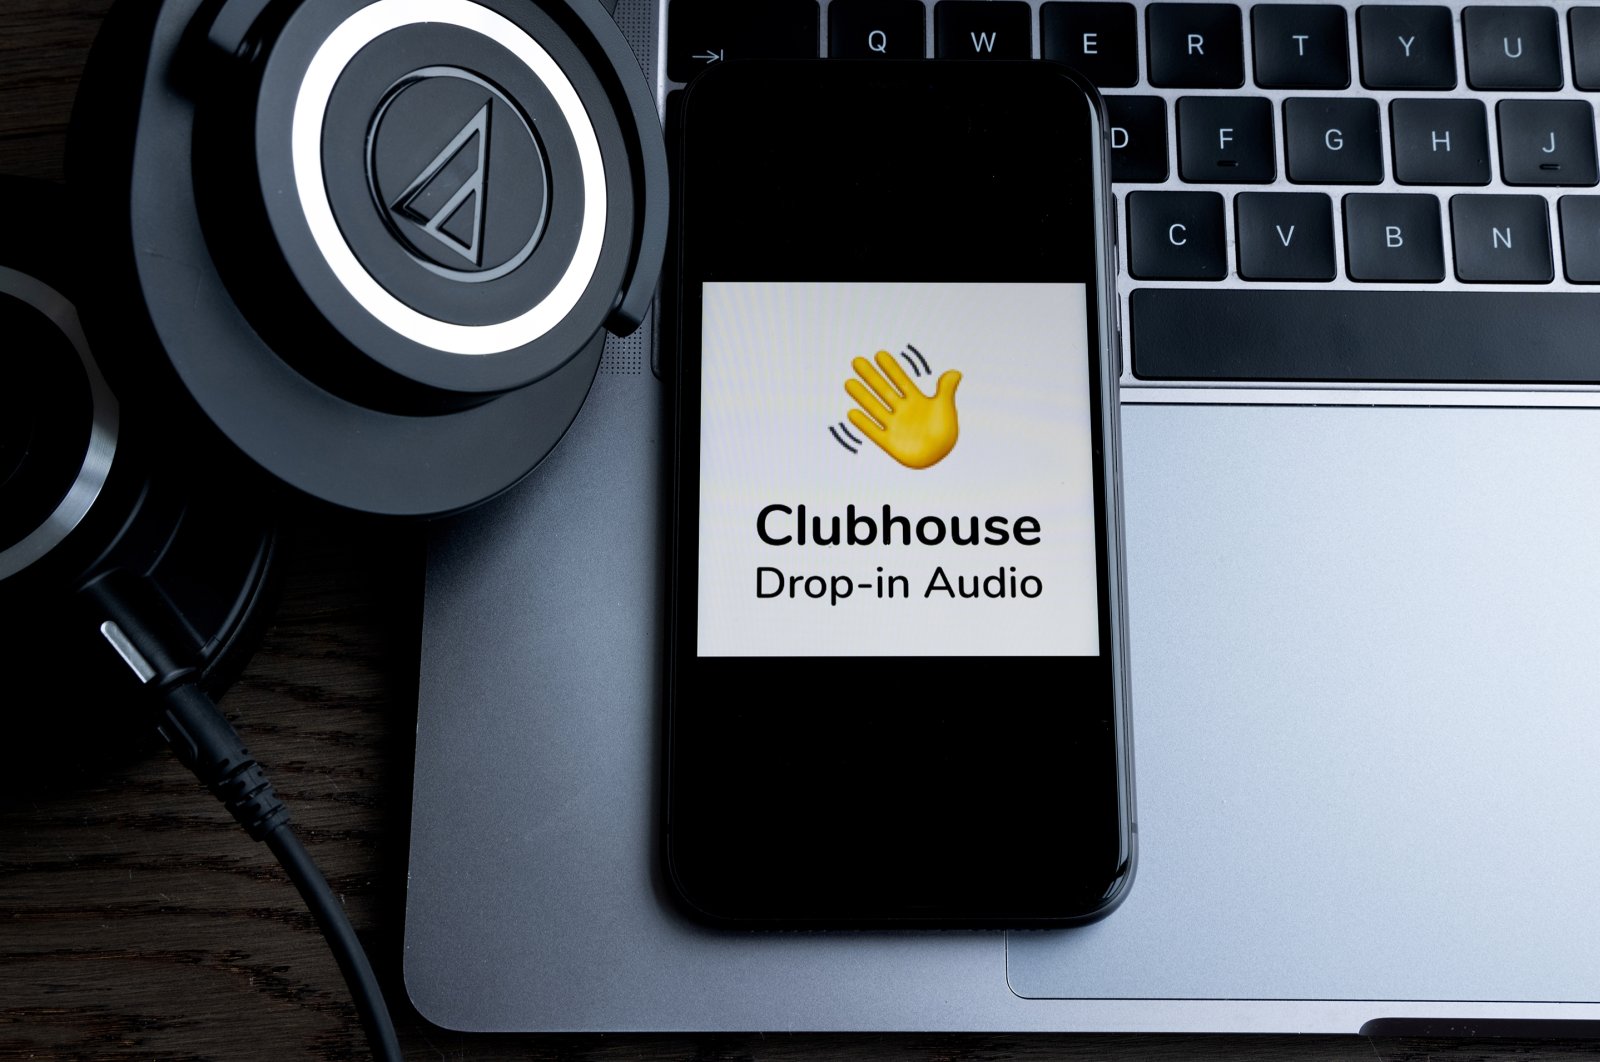 The Clubhouse application's logo is displayed on a smartphone in Amsterdam, Netherlands, Jan. 19, 2021. (Shutterstock Photo)